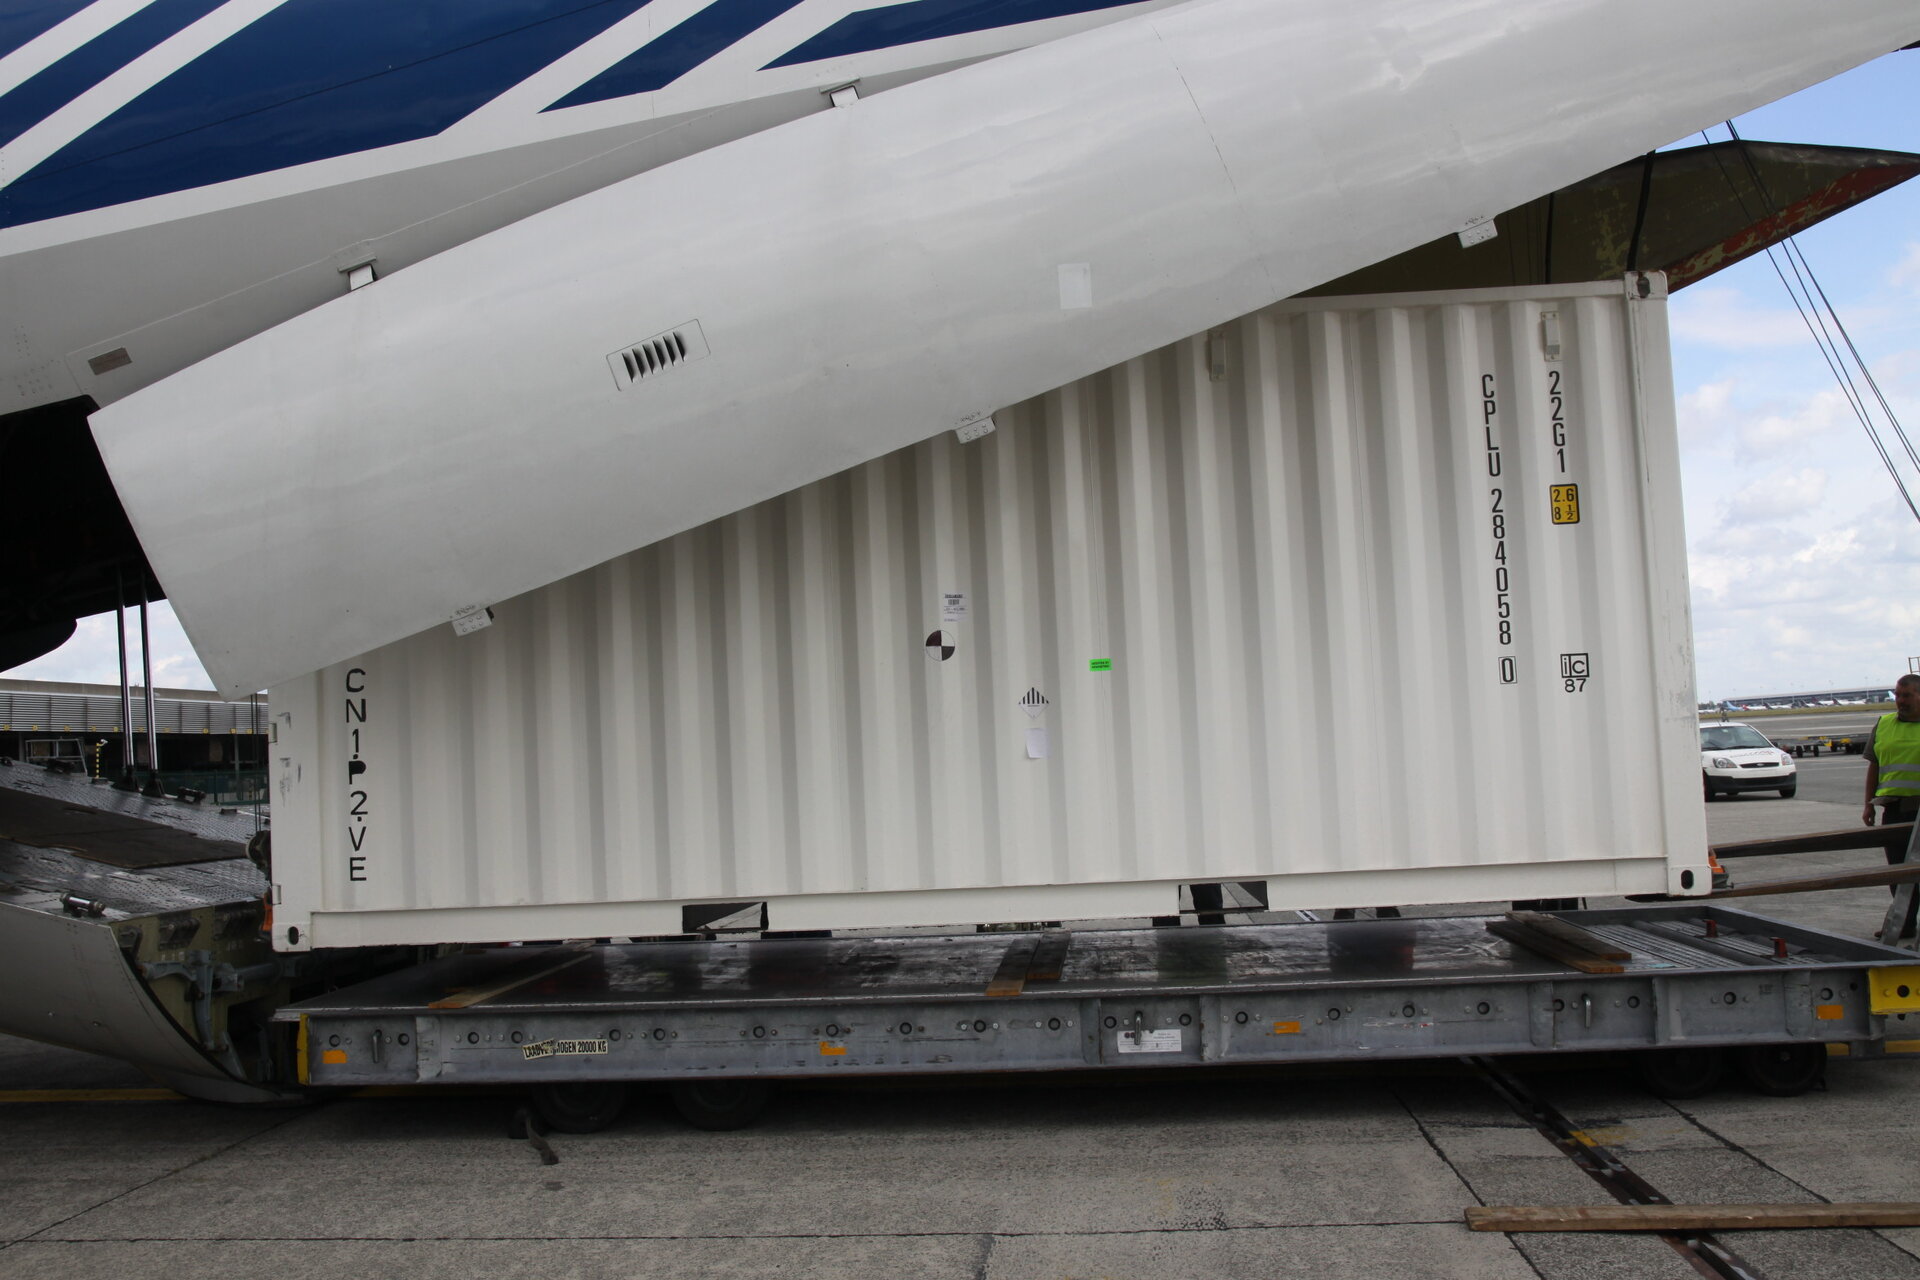 Loading of Proba-2 container in cargo plane at Brussels airport